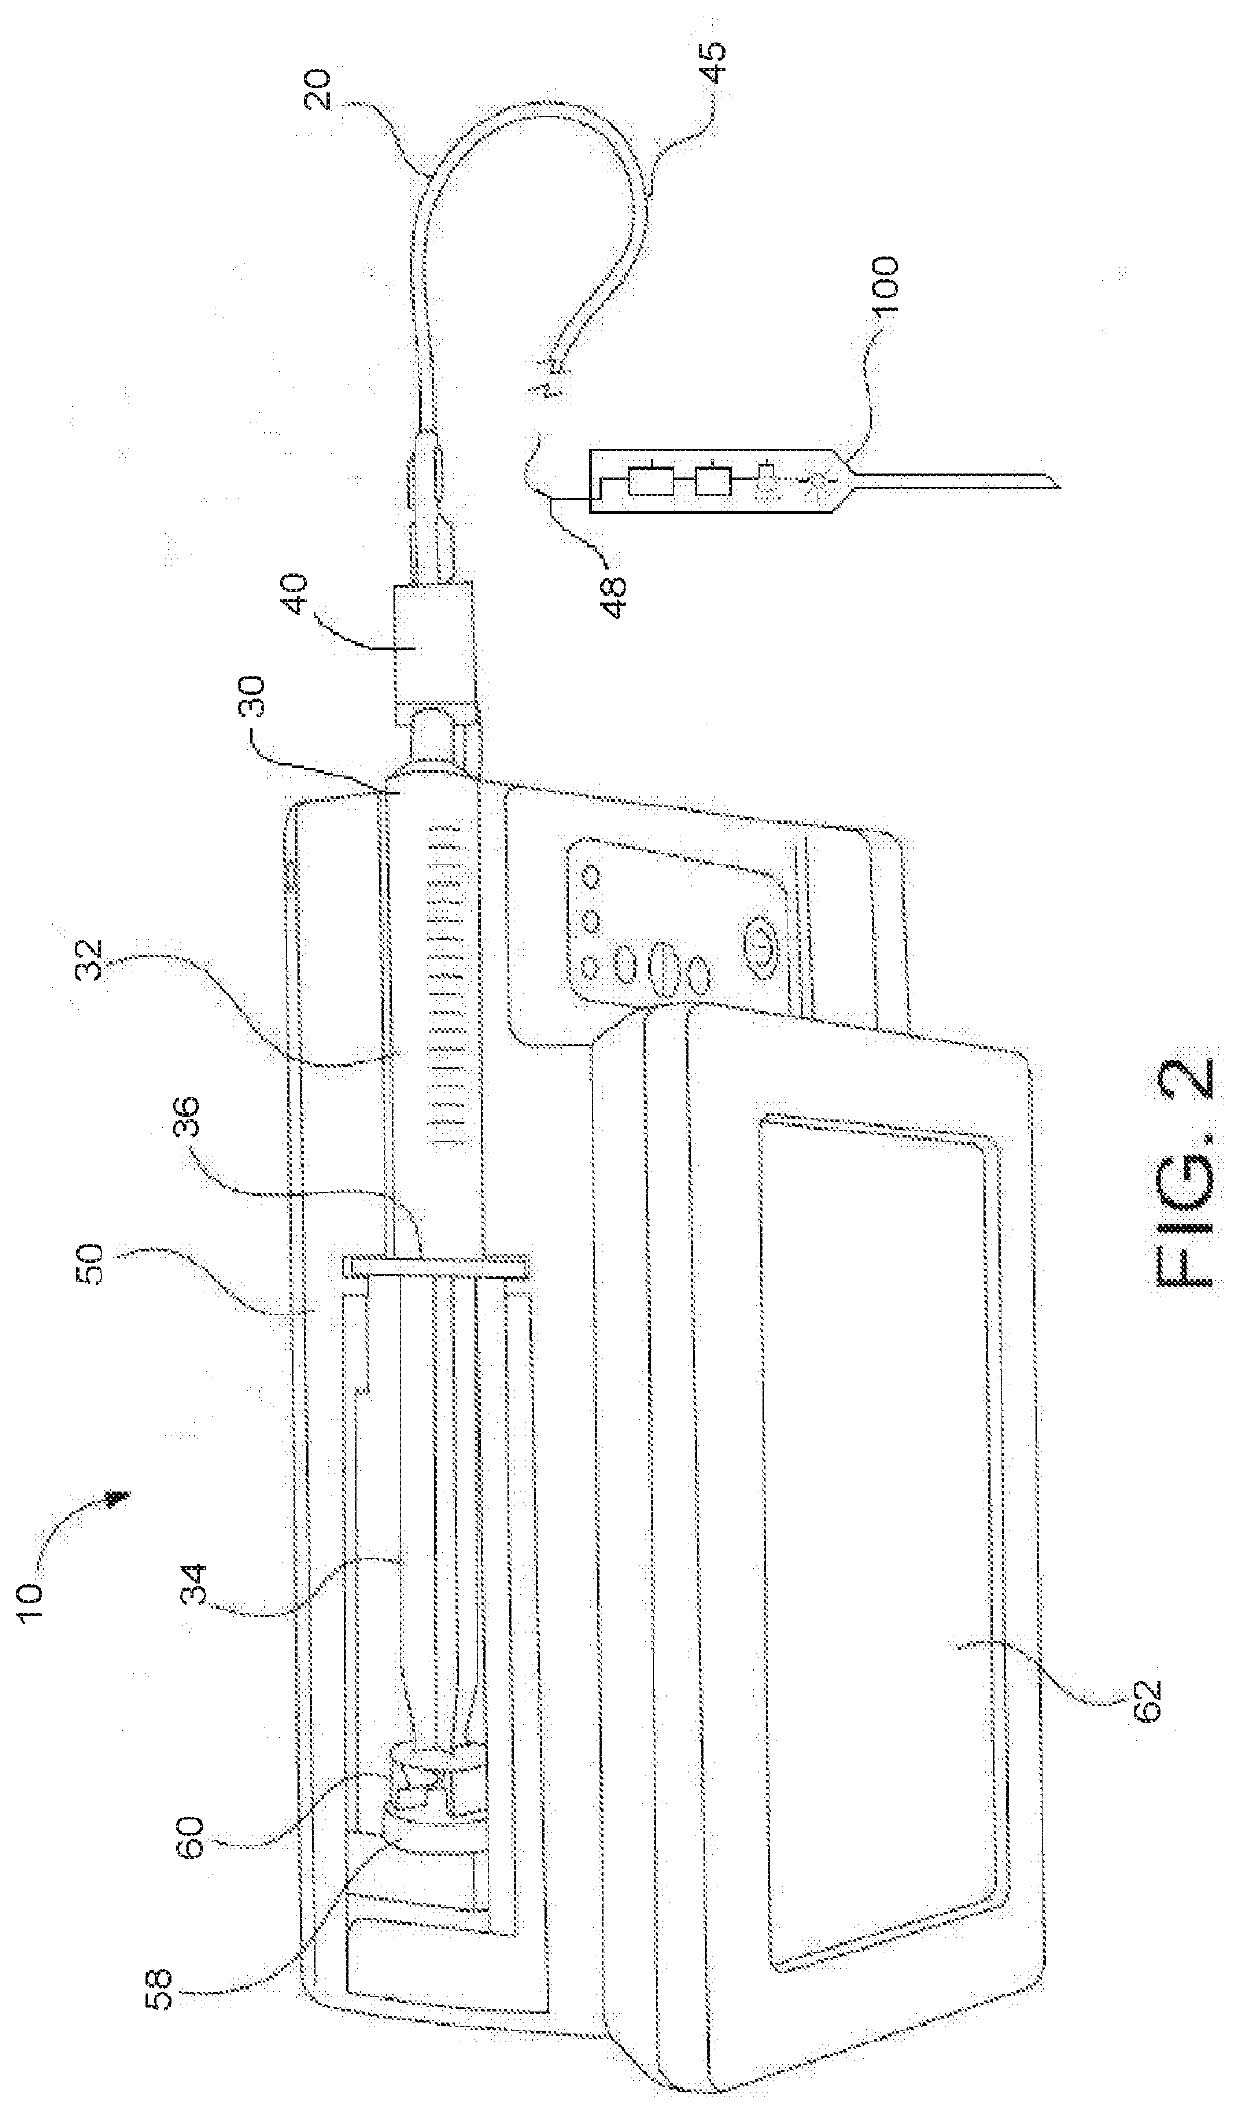 Method and apparatus for performing a peripheral nerve block